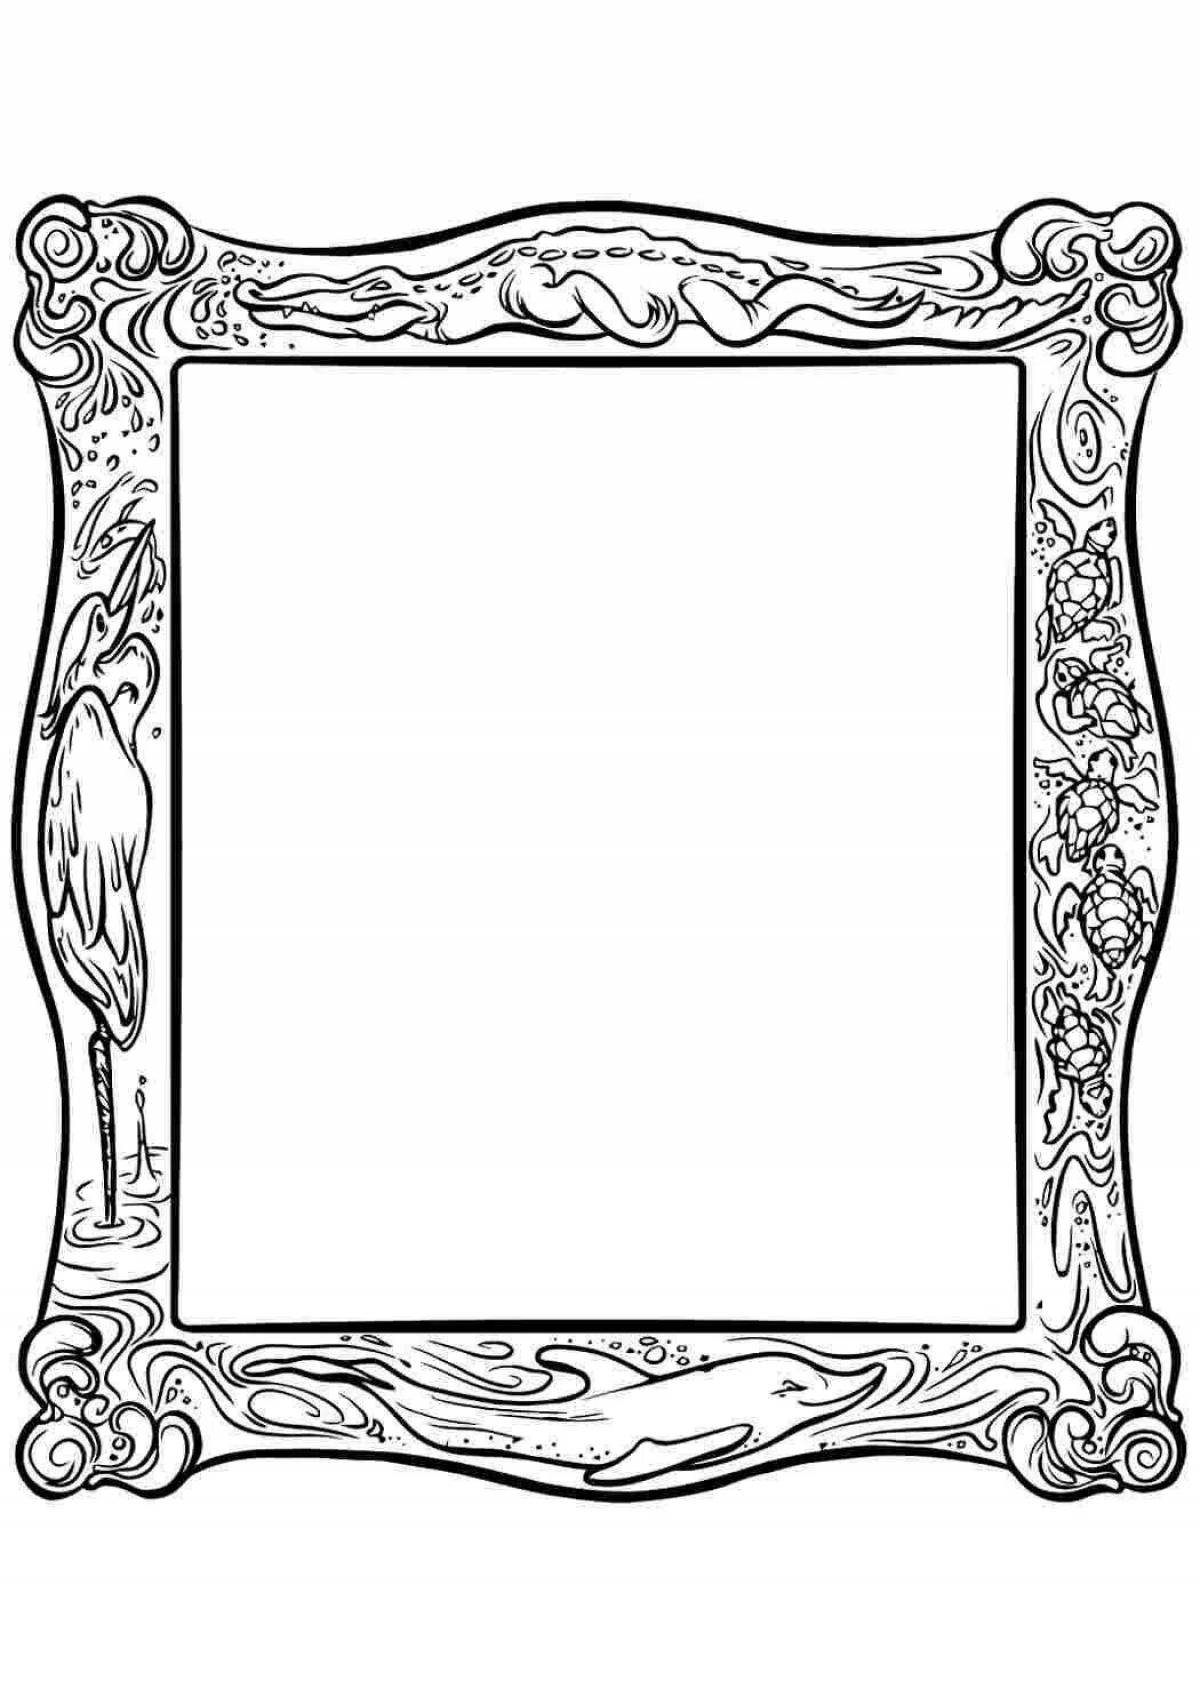 Great coloring frame